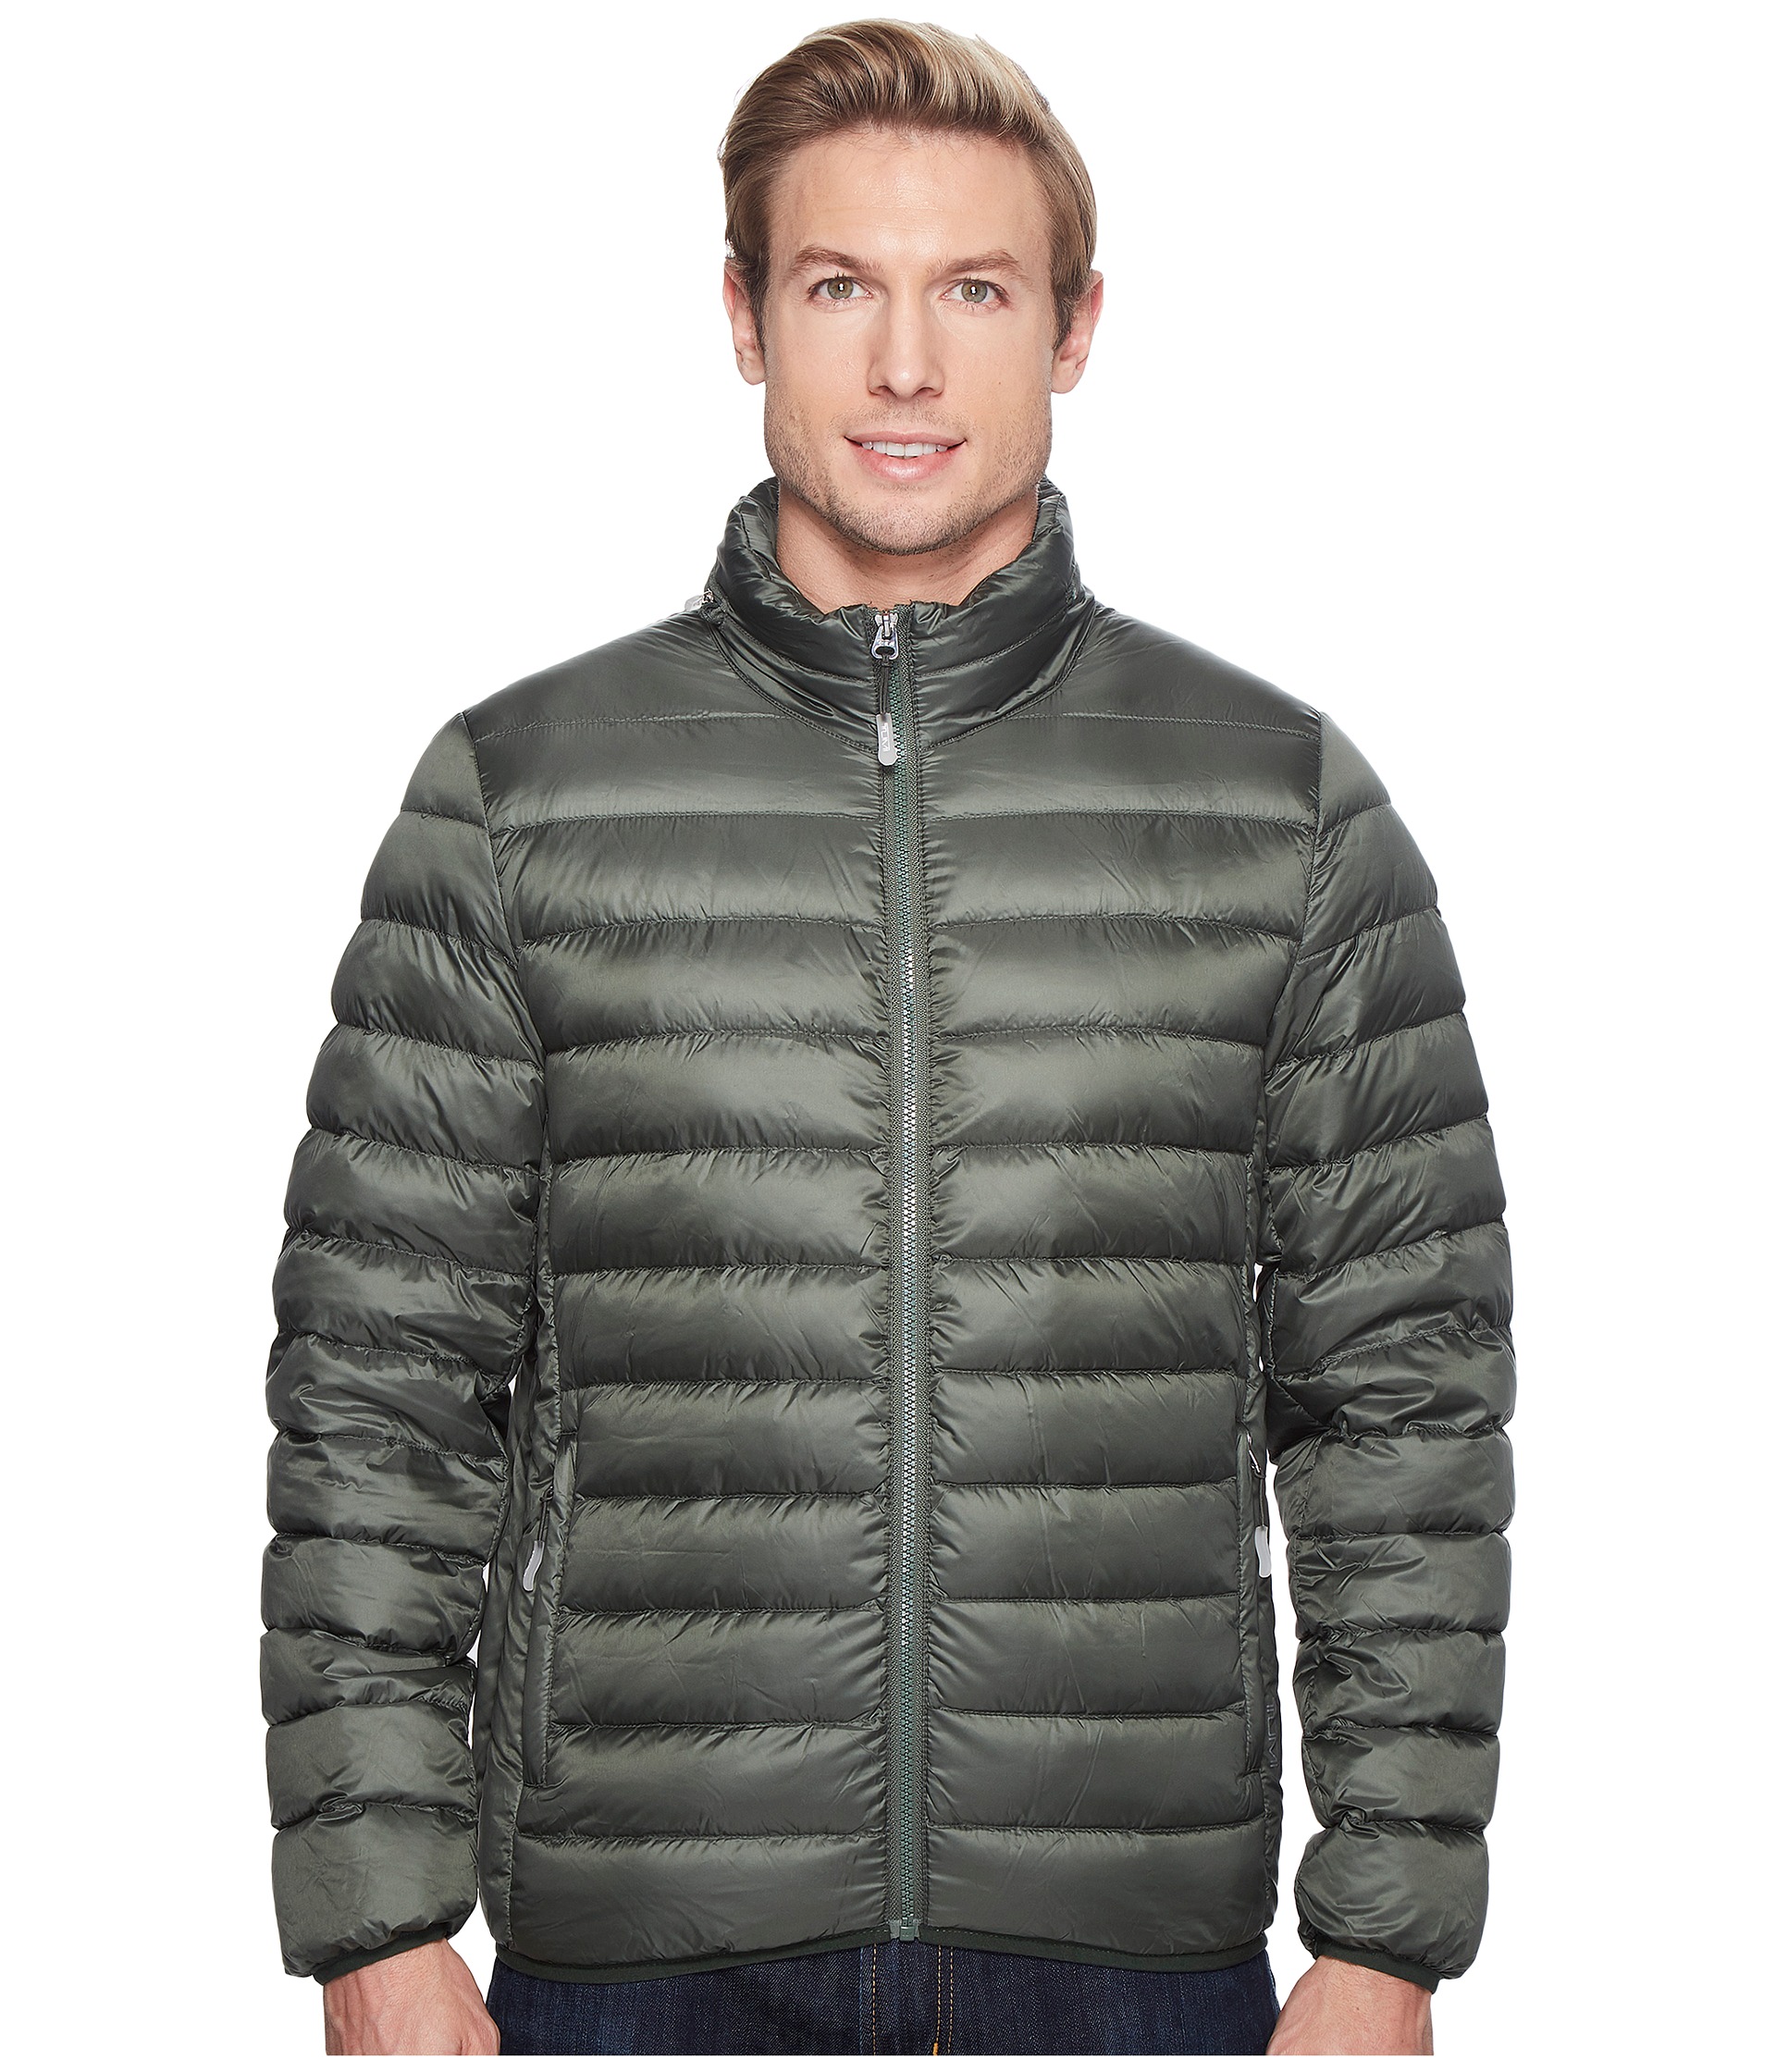 Tumi Patrol Packable Travel Puffer Jacket at Zappos.com